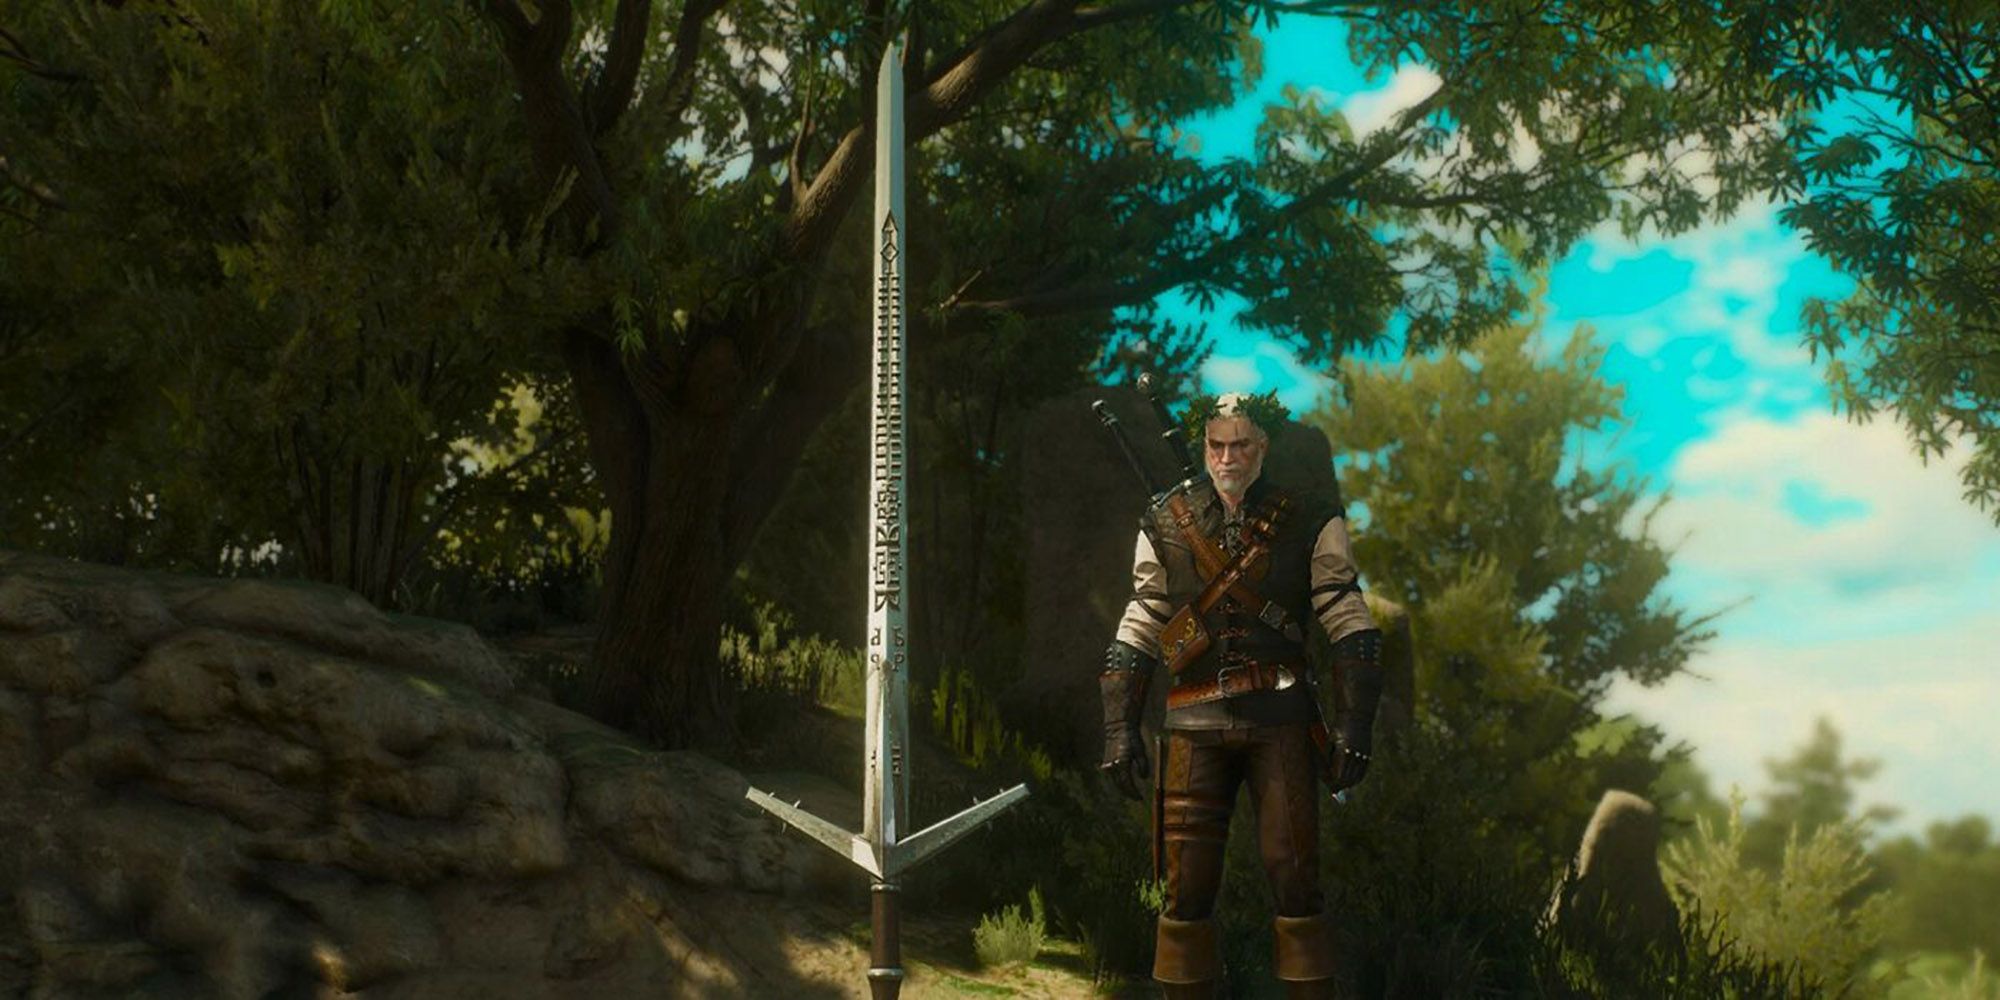 Witcher 3 - Geralt Looking At Aerondight For The Lady Of The Lake Quest